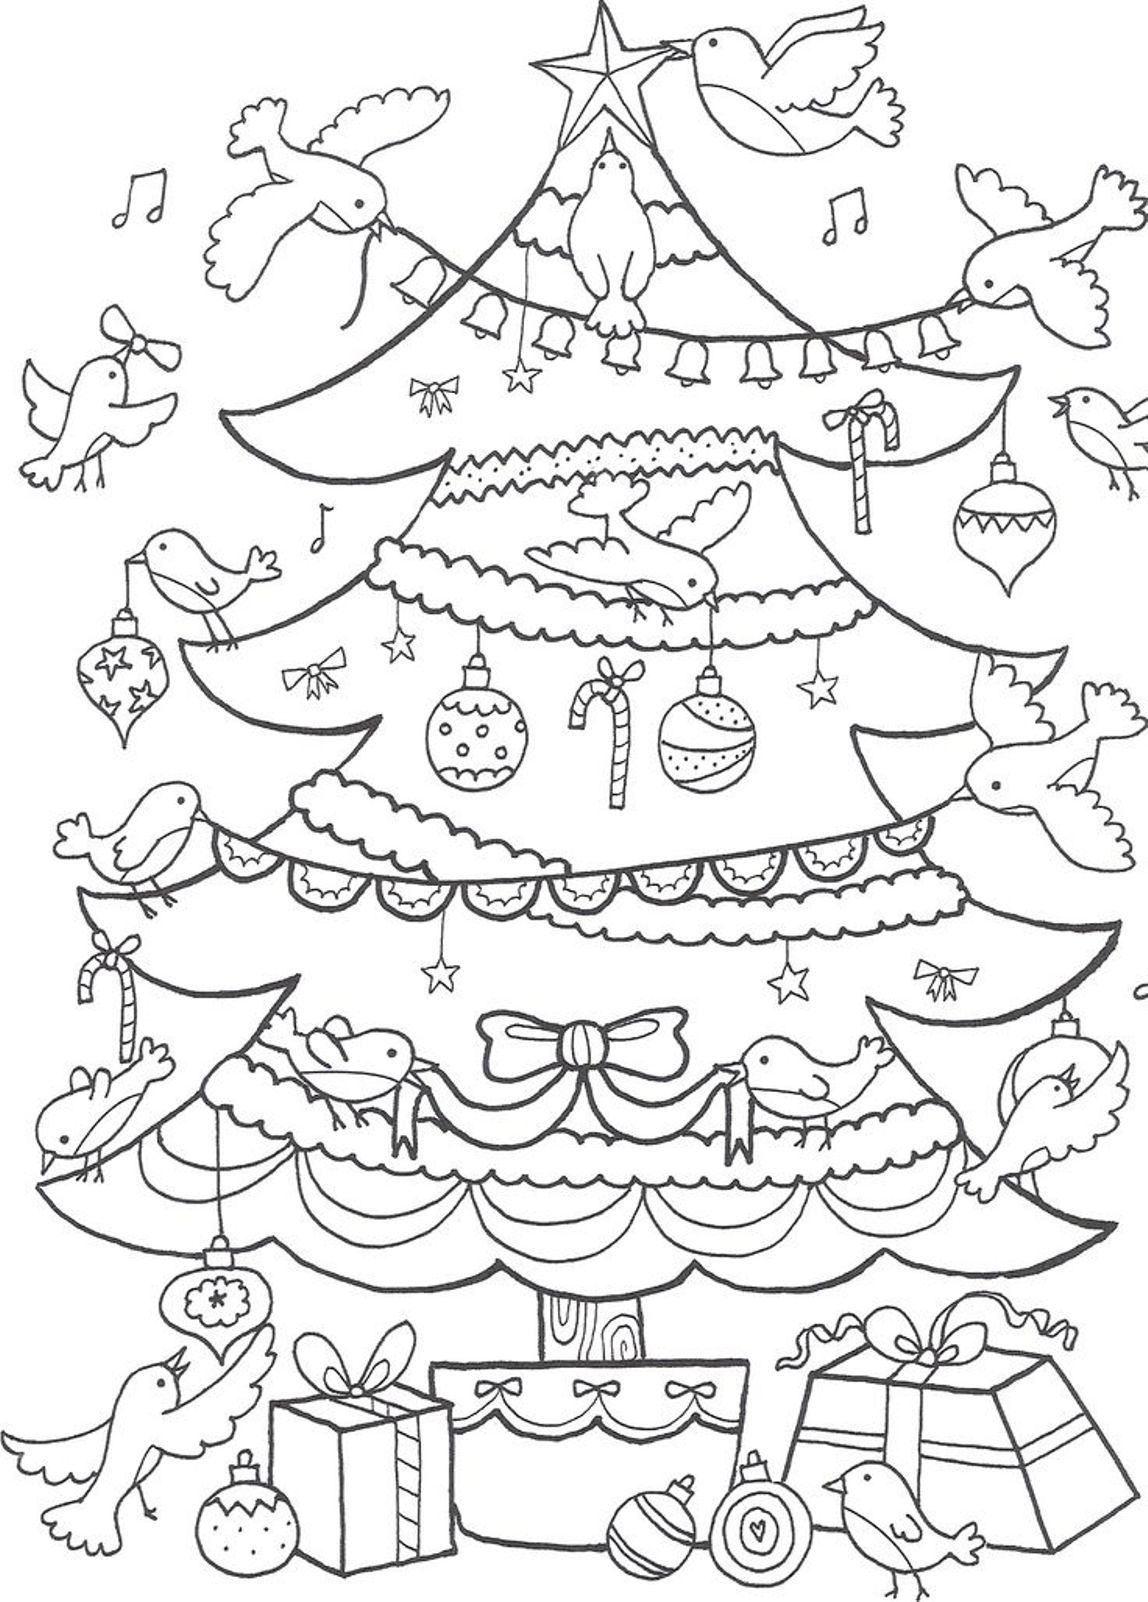 Birds Decorating Christmas Tree Coloring Page | Christmas Coloring ...